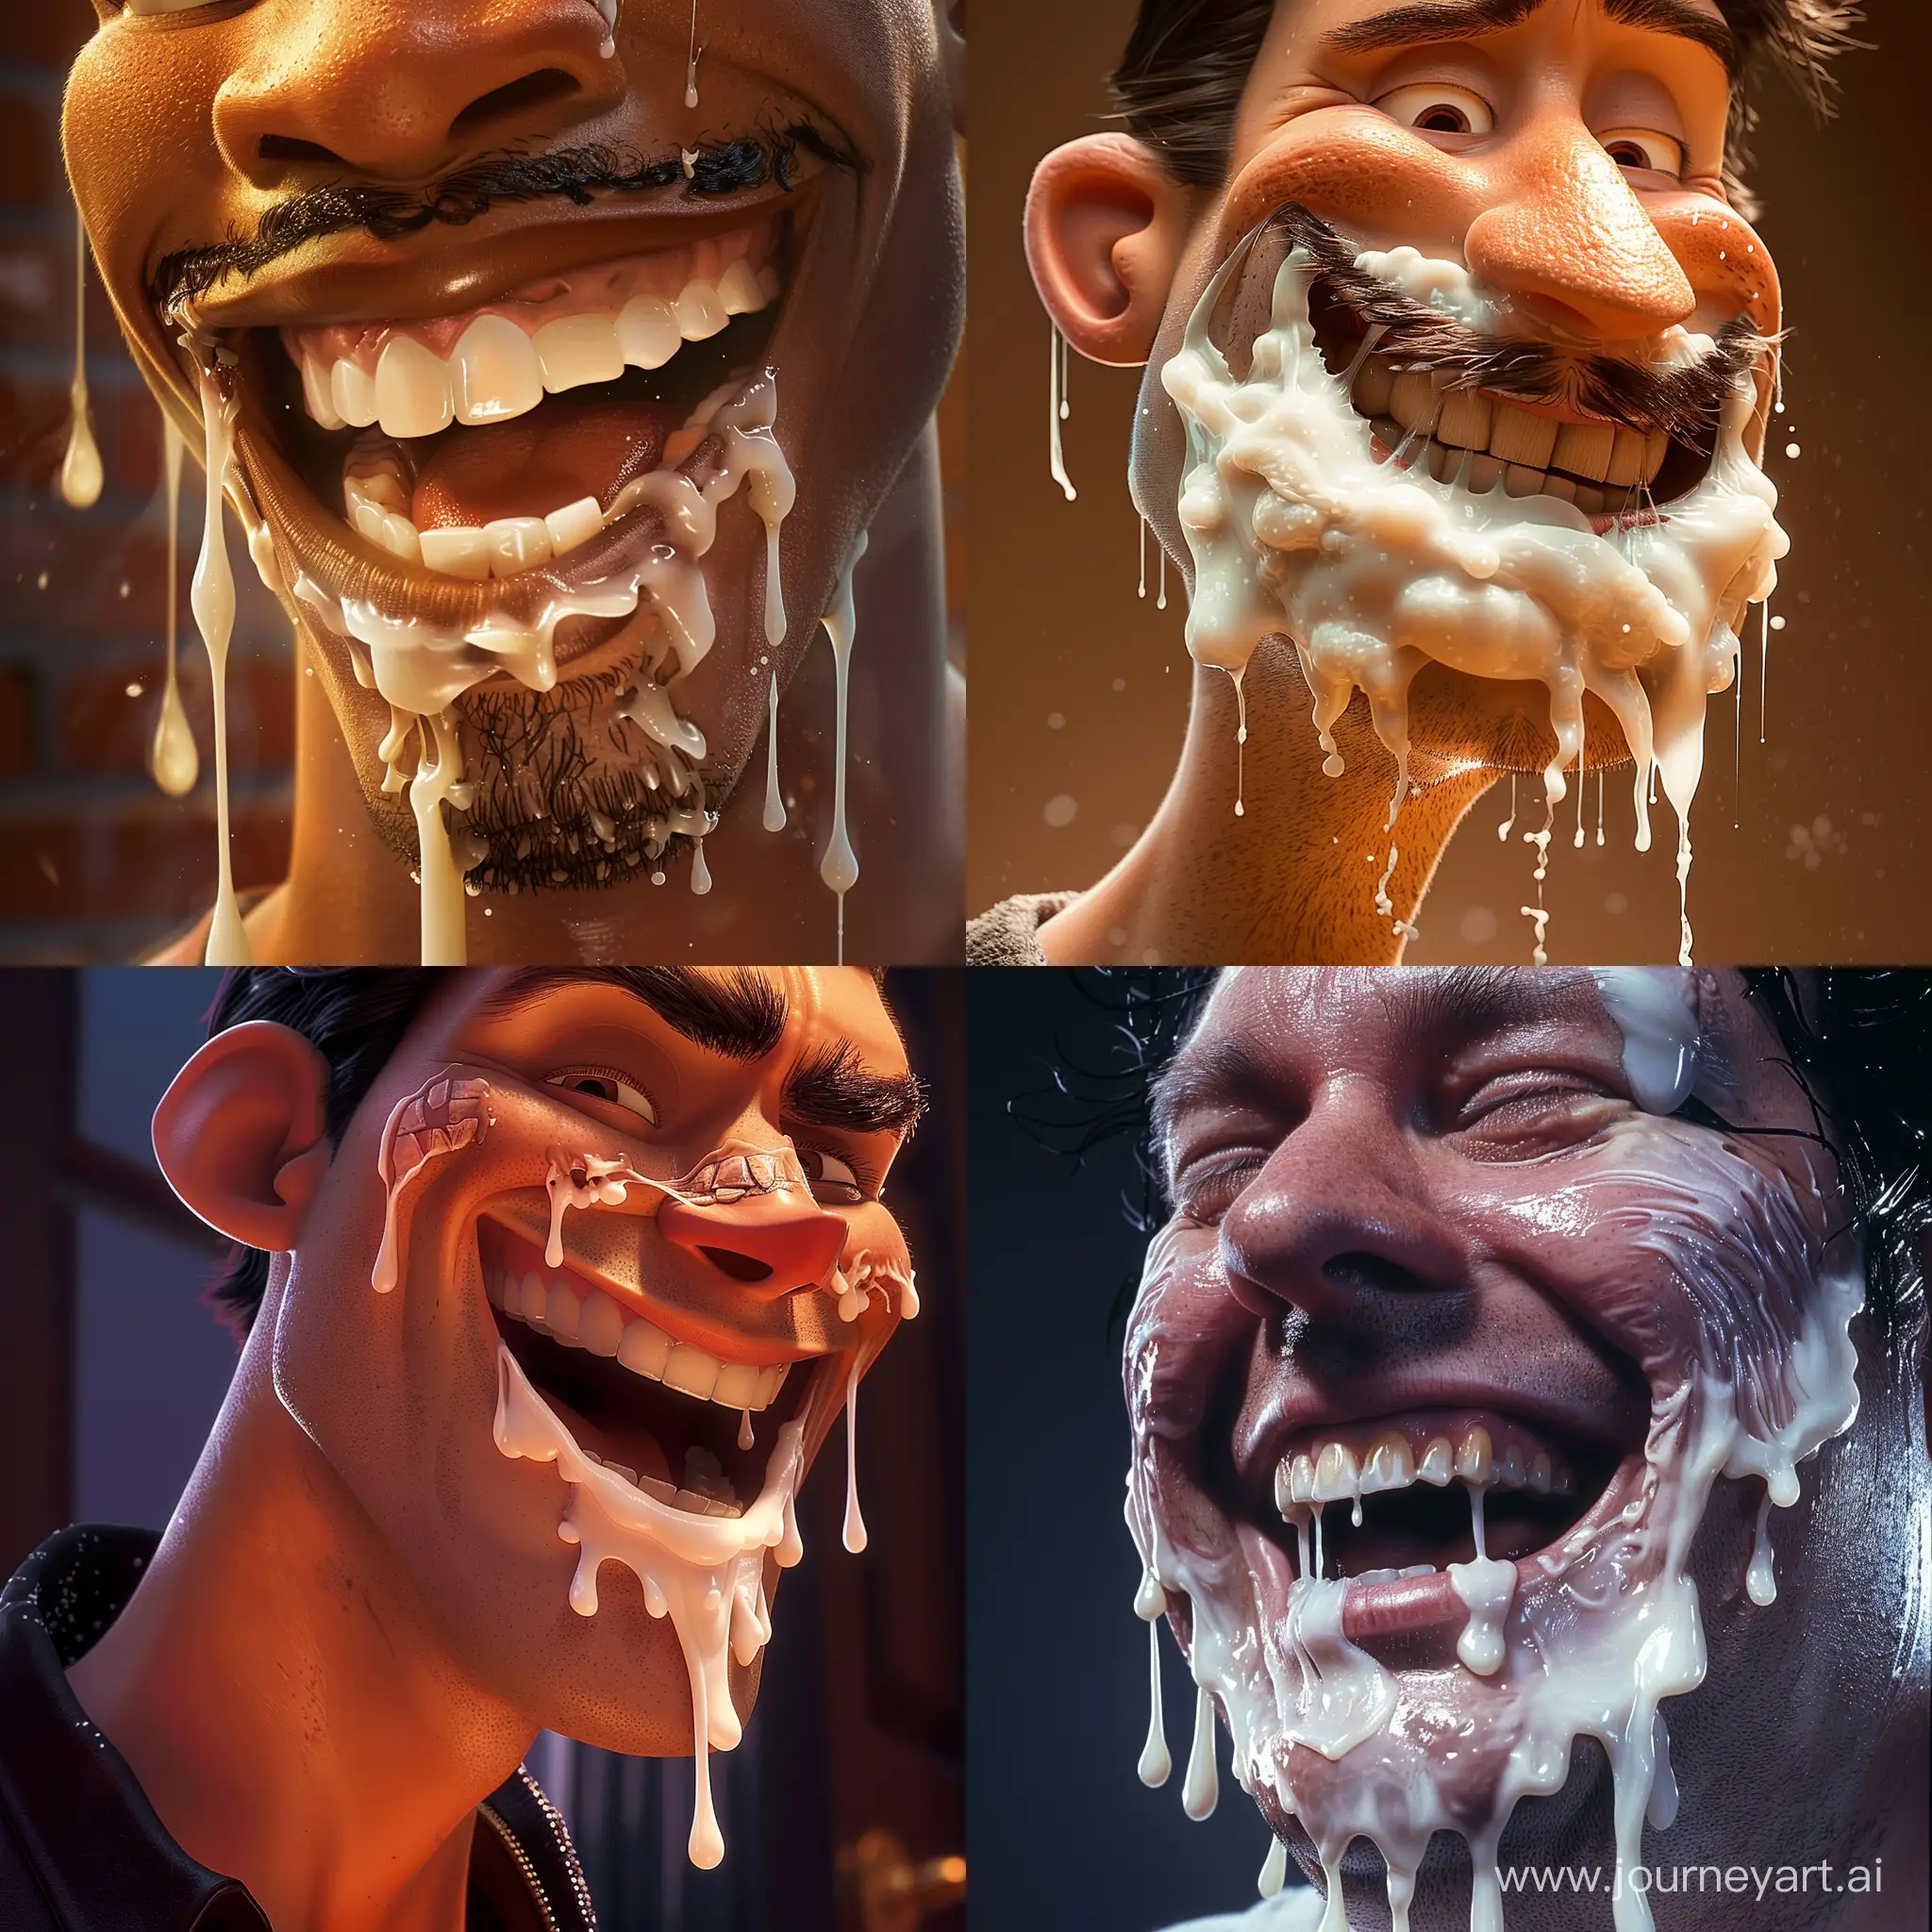 Pixar movie poster of a man smiling, mouth covered in dripping white goo, close-up